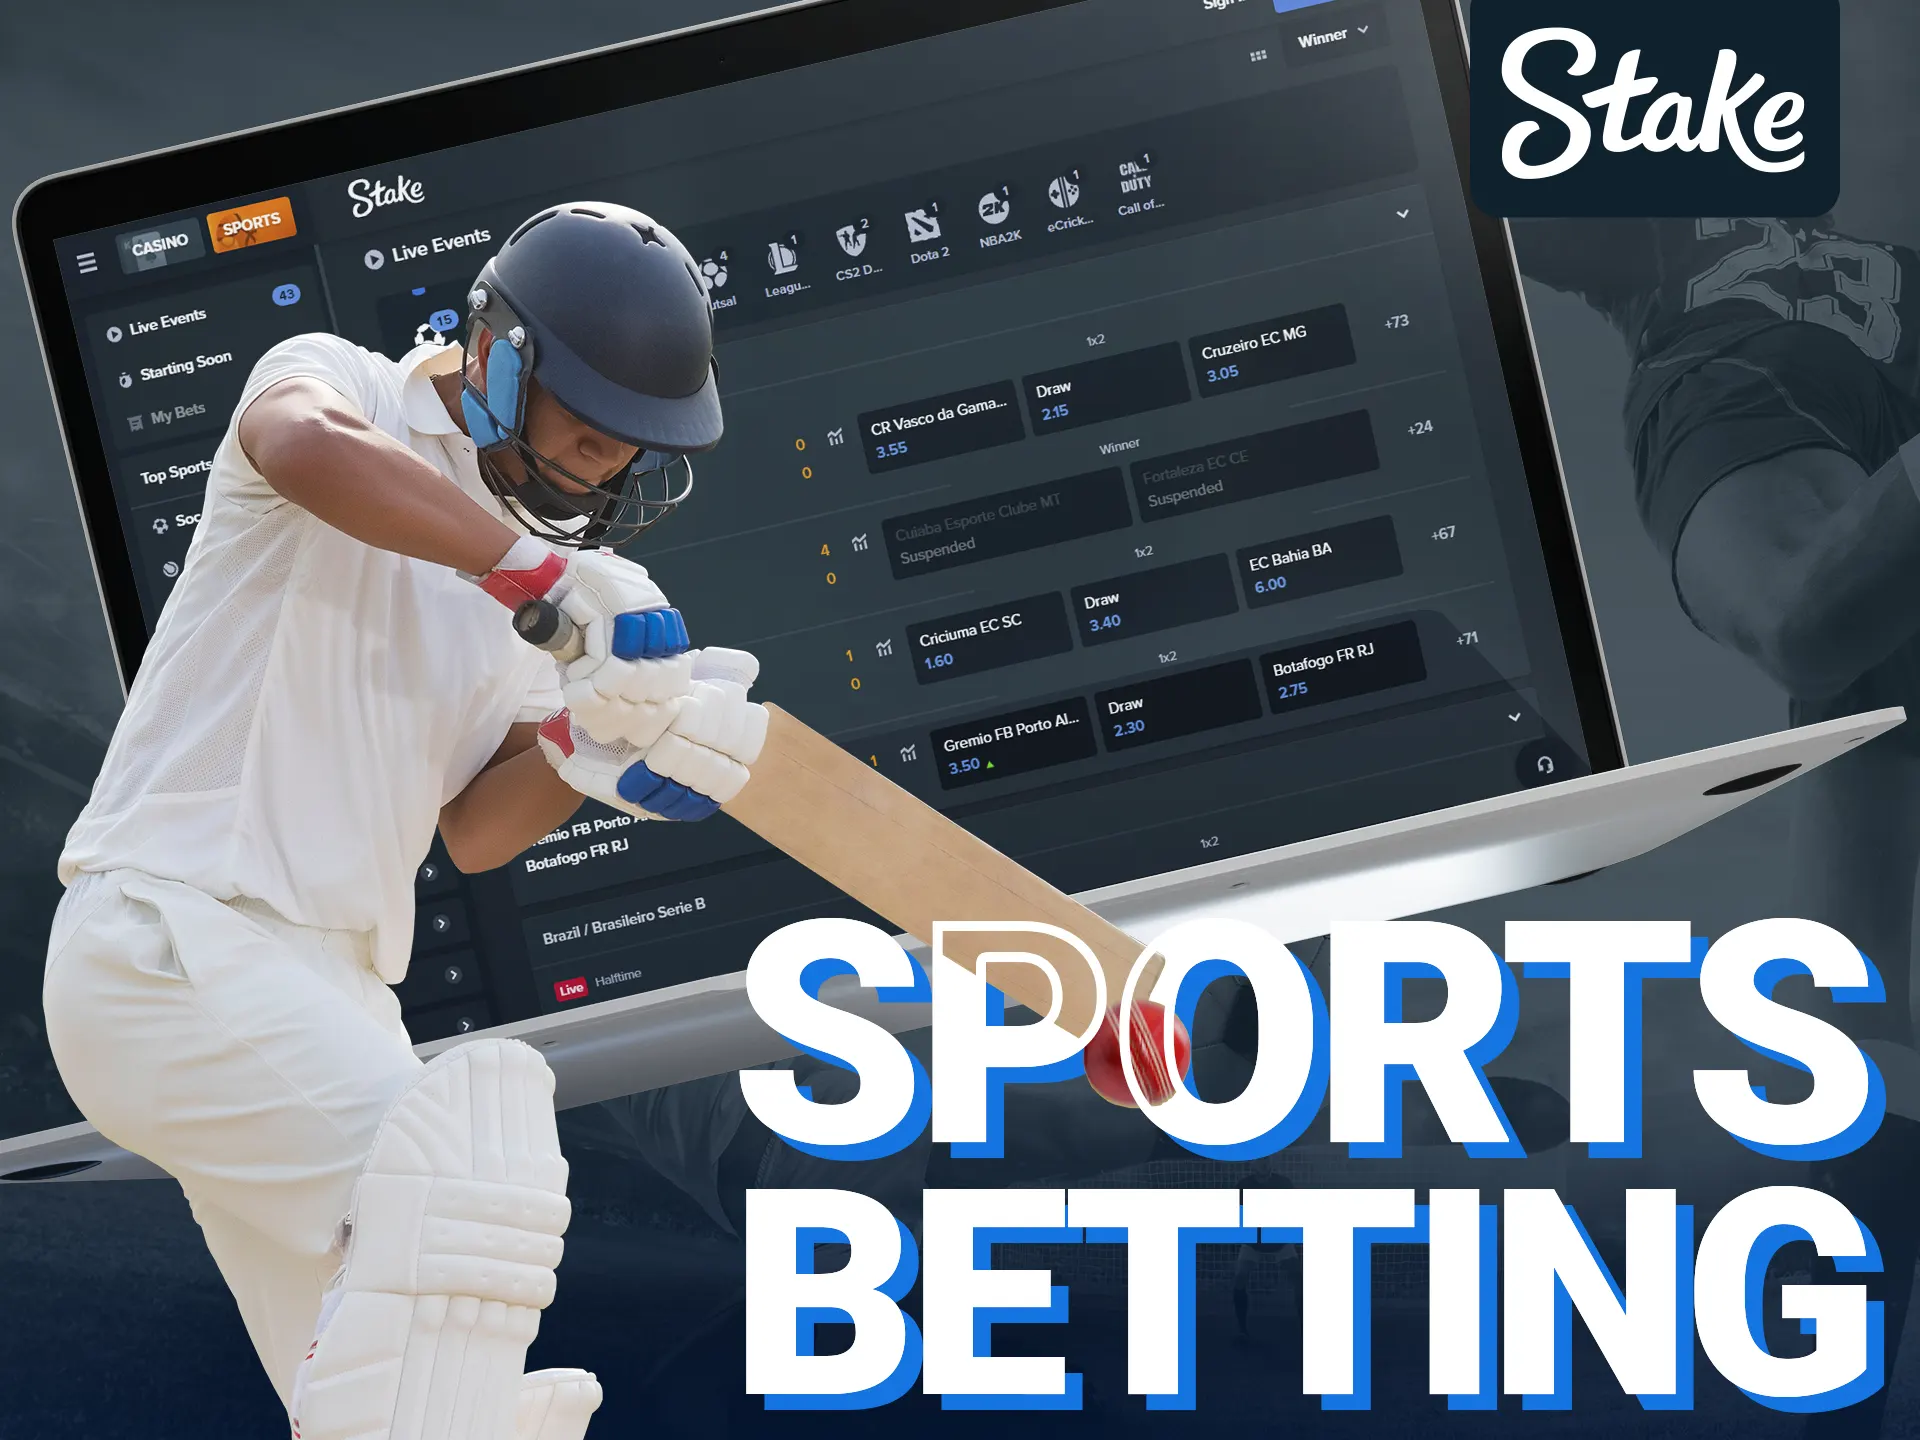 Stake offers extensive sports and eSports betting options.